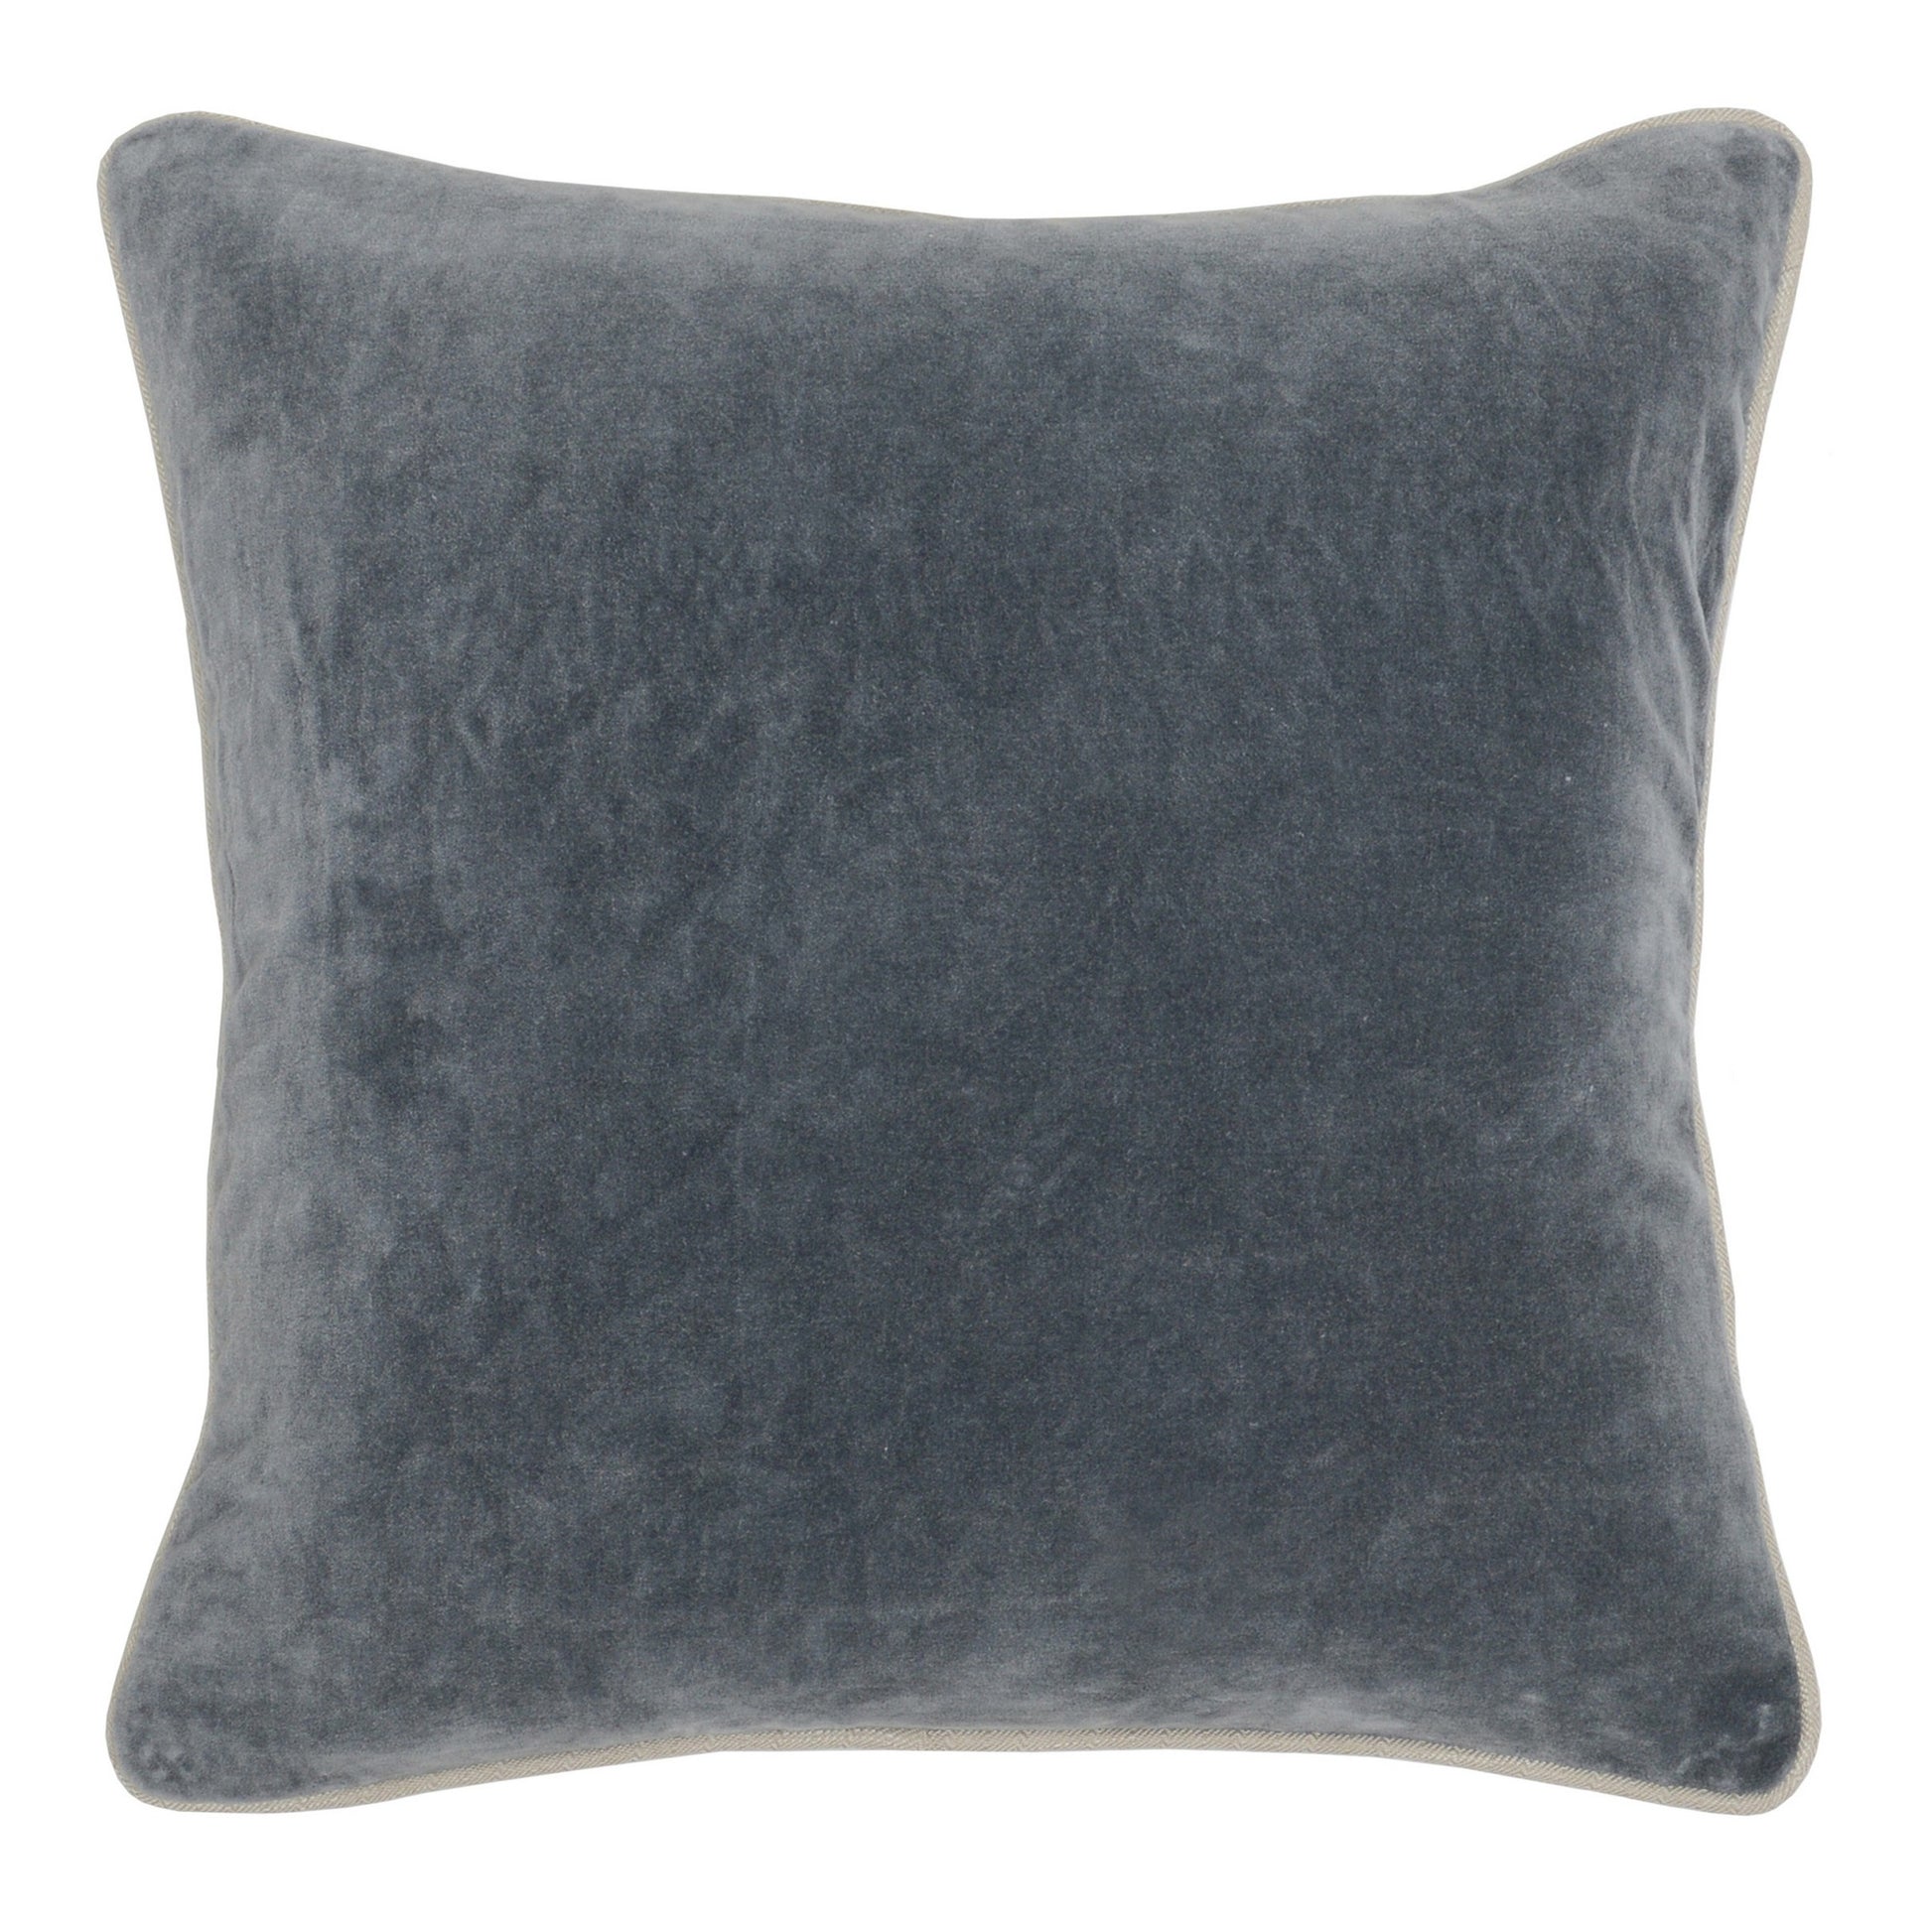 Square Fabric Throw Pillow with Solid Color and